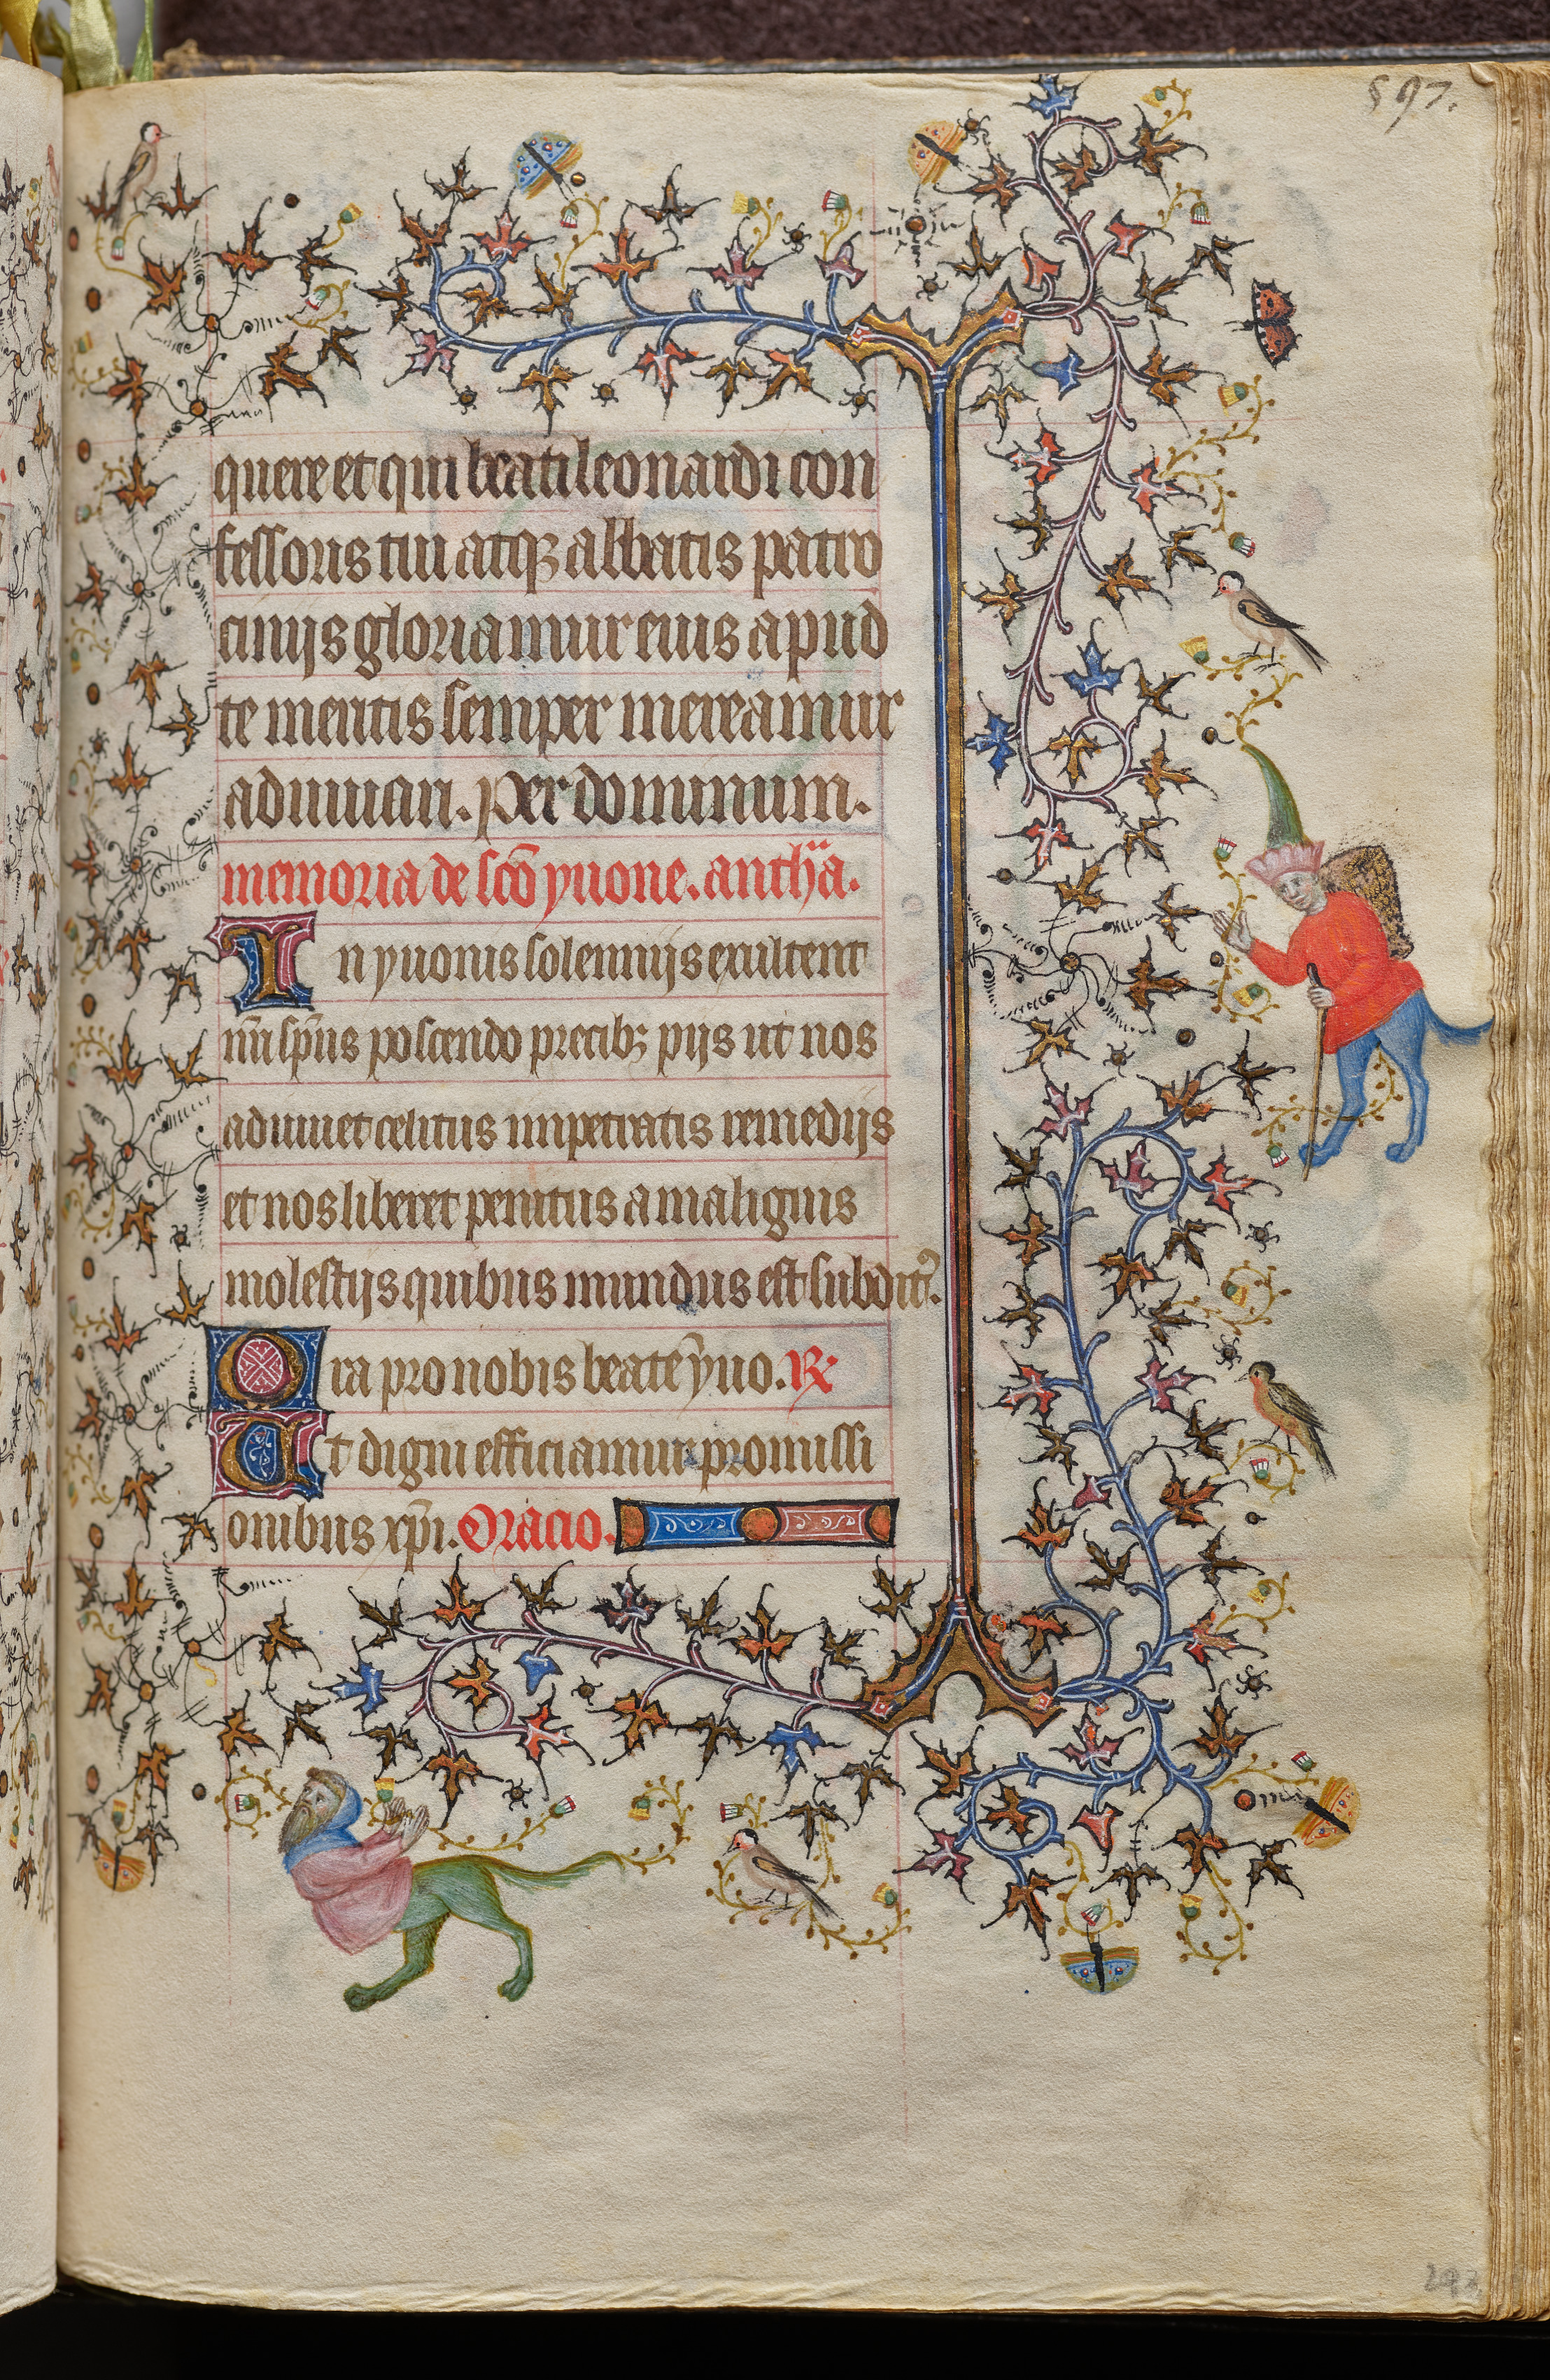 Hours of Charles the Noble, King of Navarre (1361-1425): fol. 293r, Text